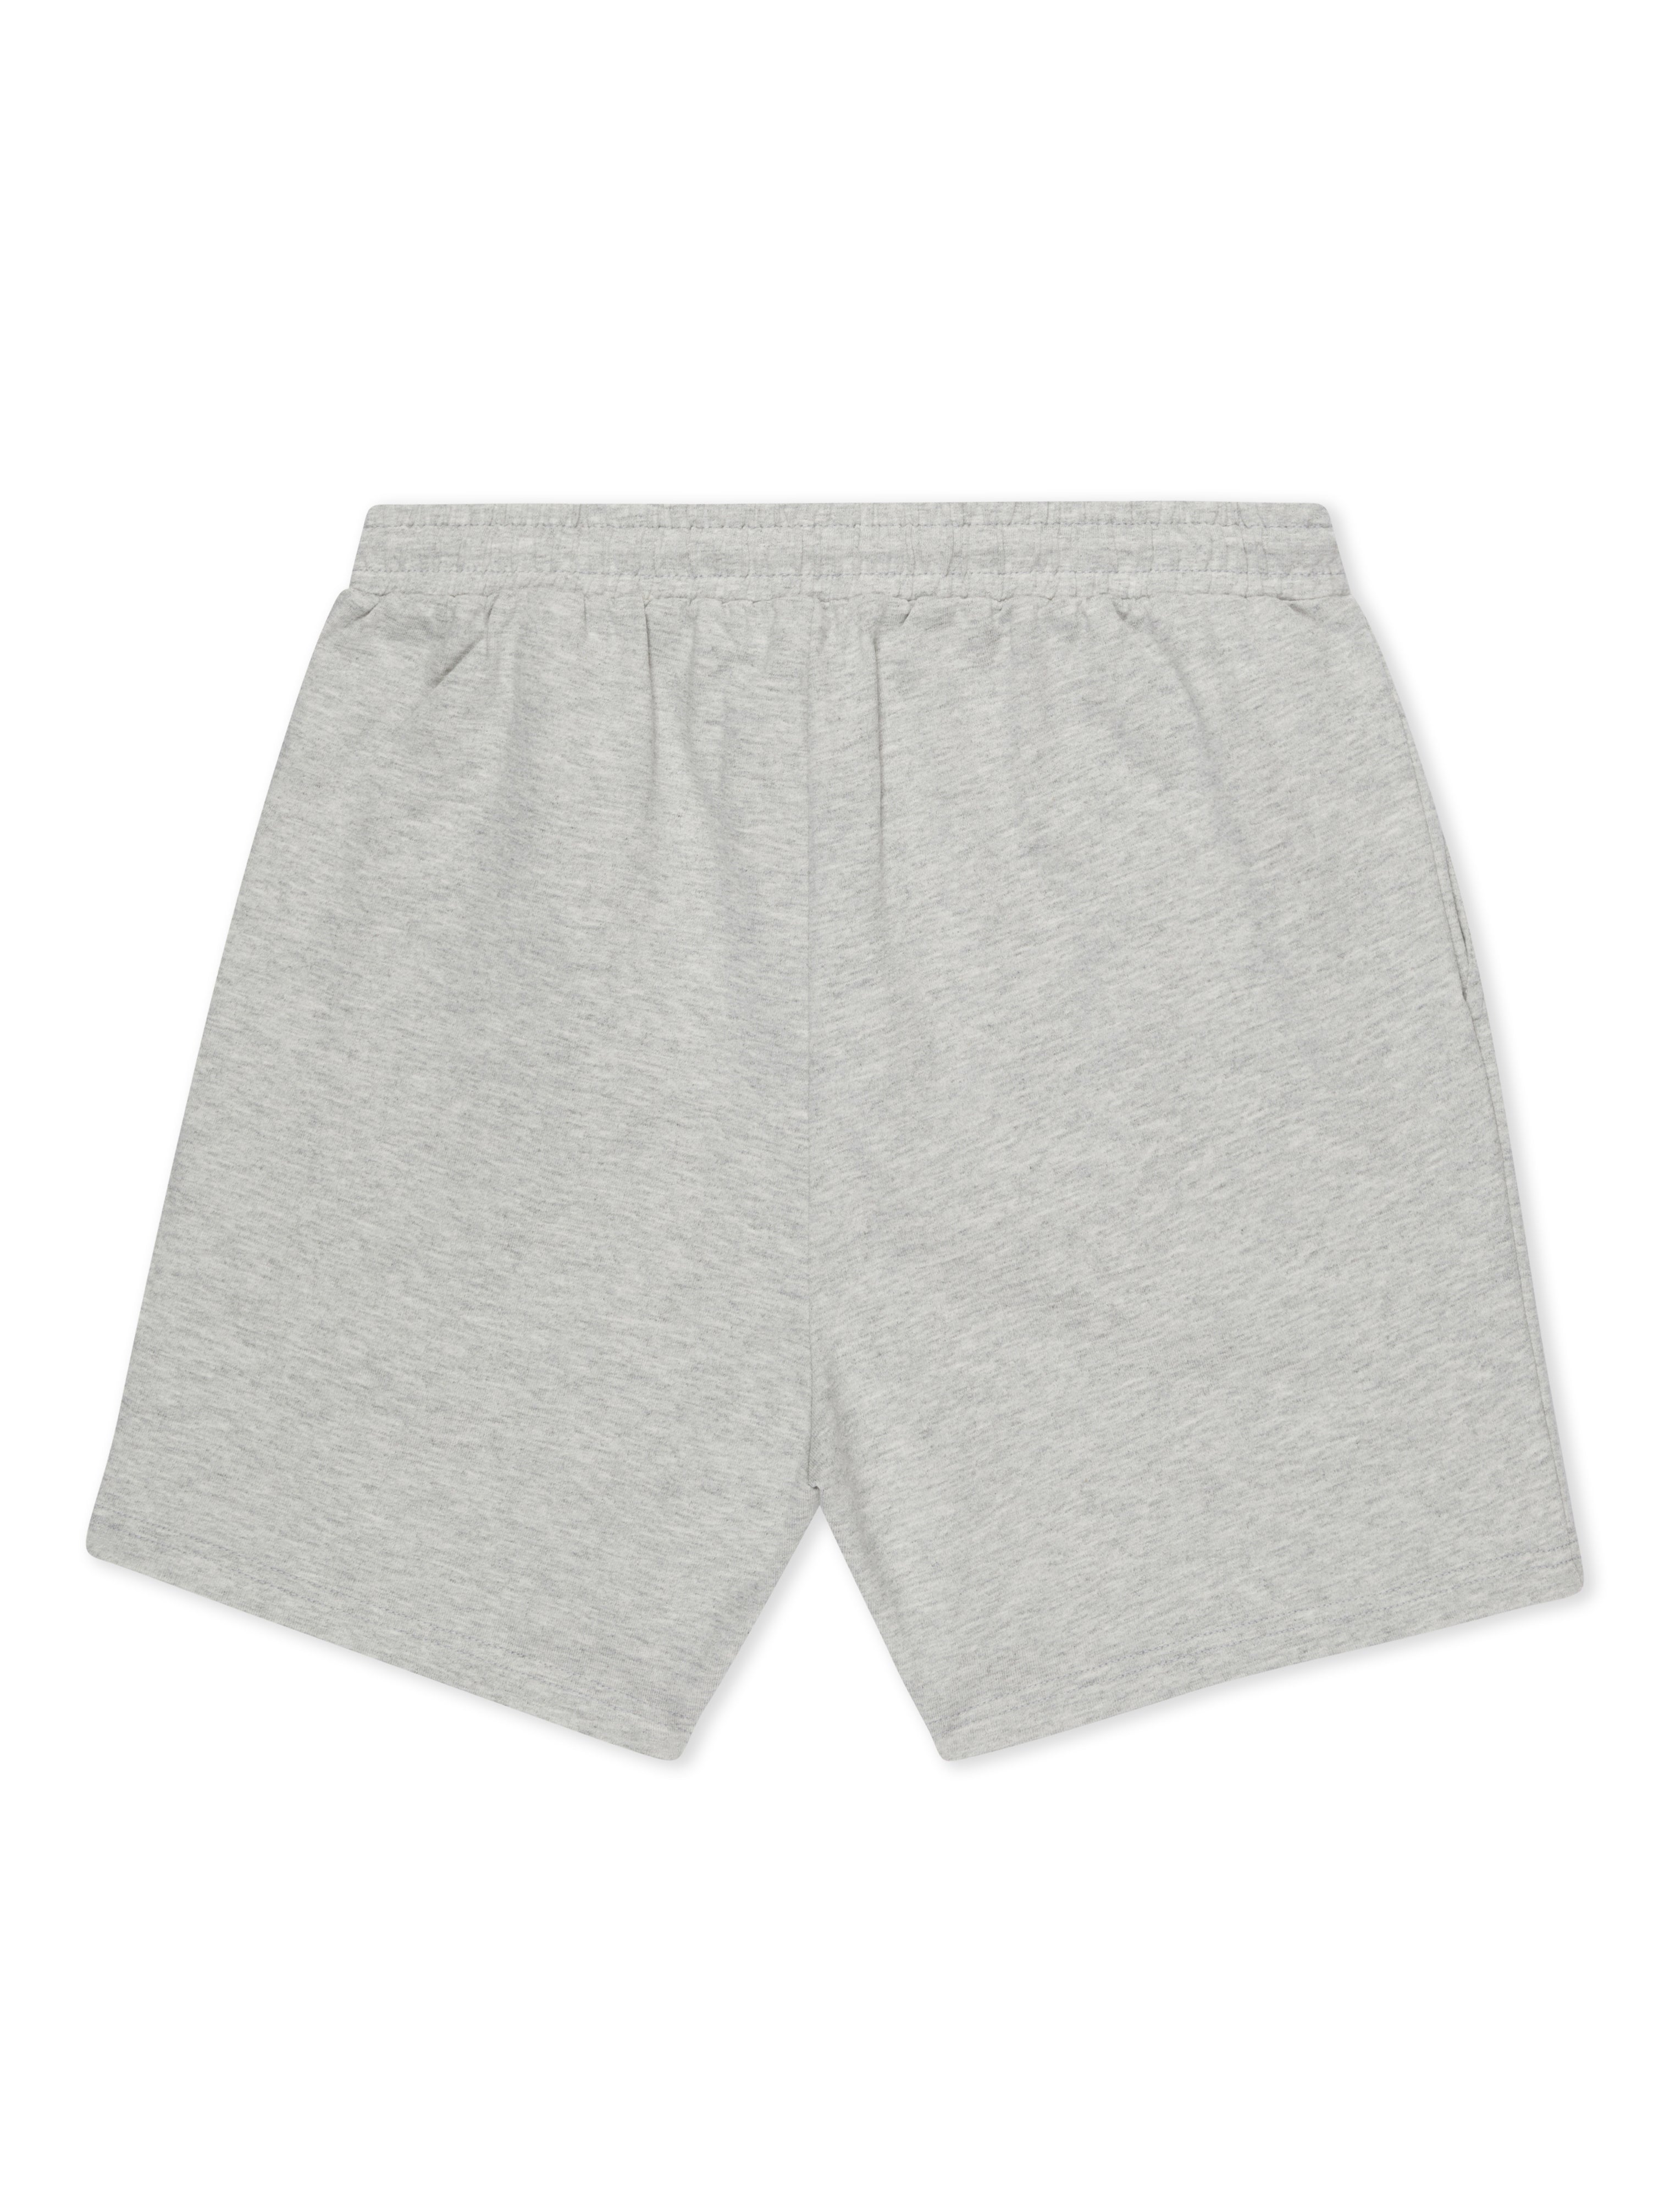 Mens Grey Cotton Gym Shorts | Sol Apparel | Buy Yours Now